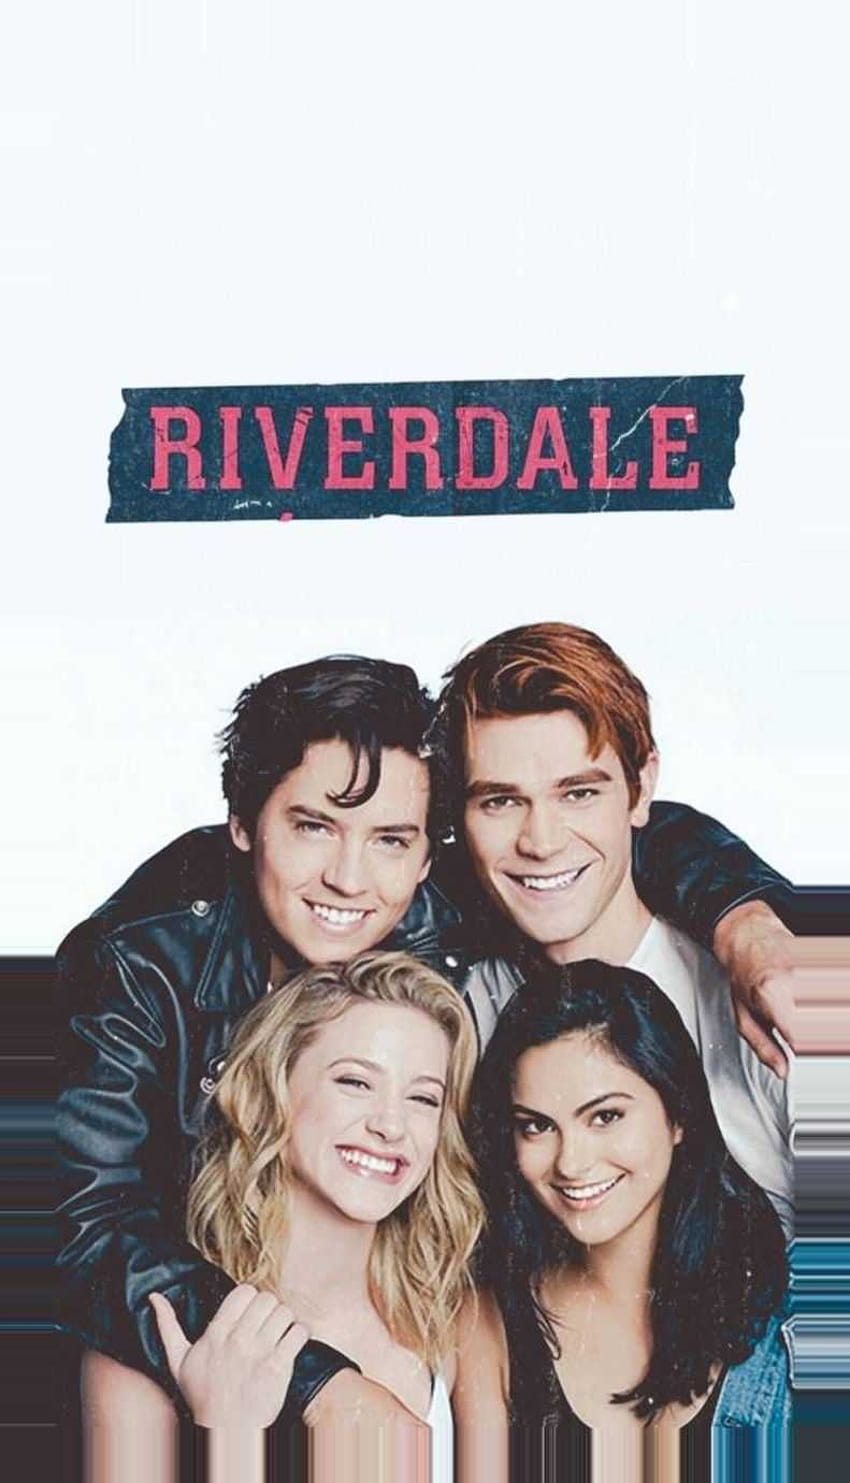 Diner from Riverdale Wallpaper 5k Ultra HD ID8772